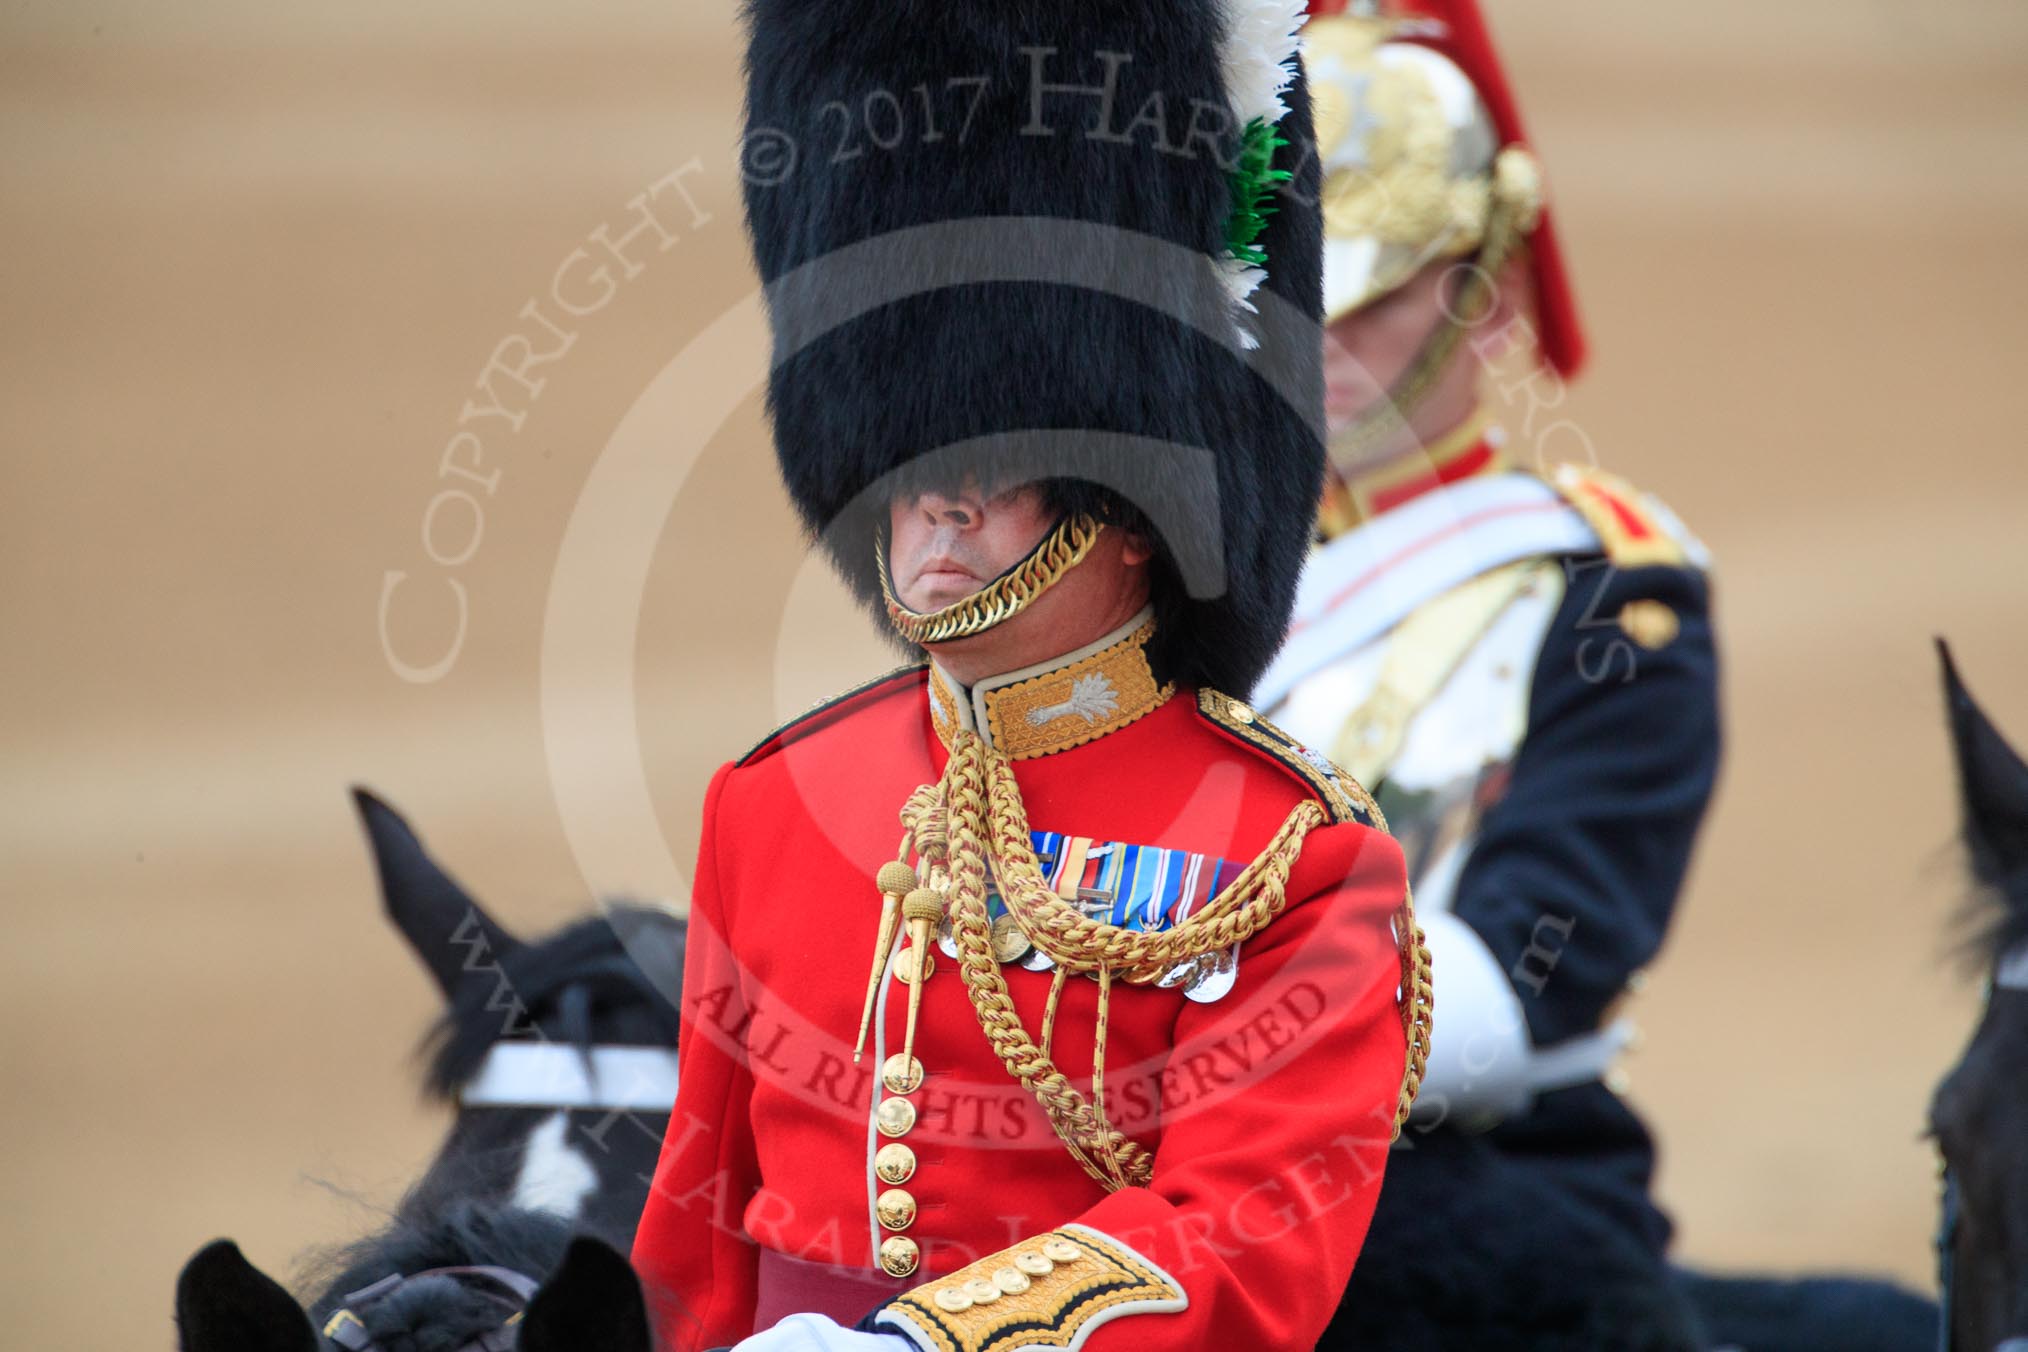 during The Colonel's Review {iptcyear4} (final rehearsal for Trooping the Colour, The Queen's Birthday Parade)  at Horse Guards Parade, Westminster, London, 2 June 2018, 10:57.